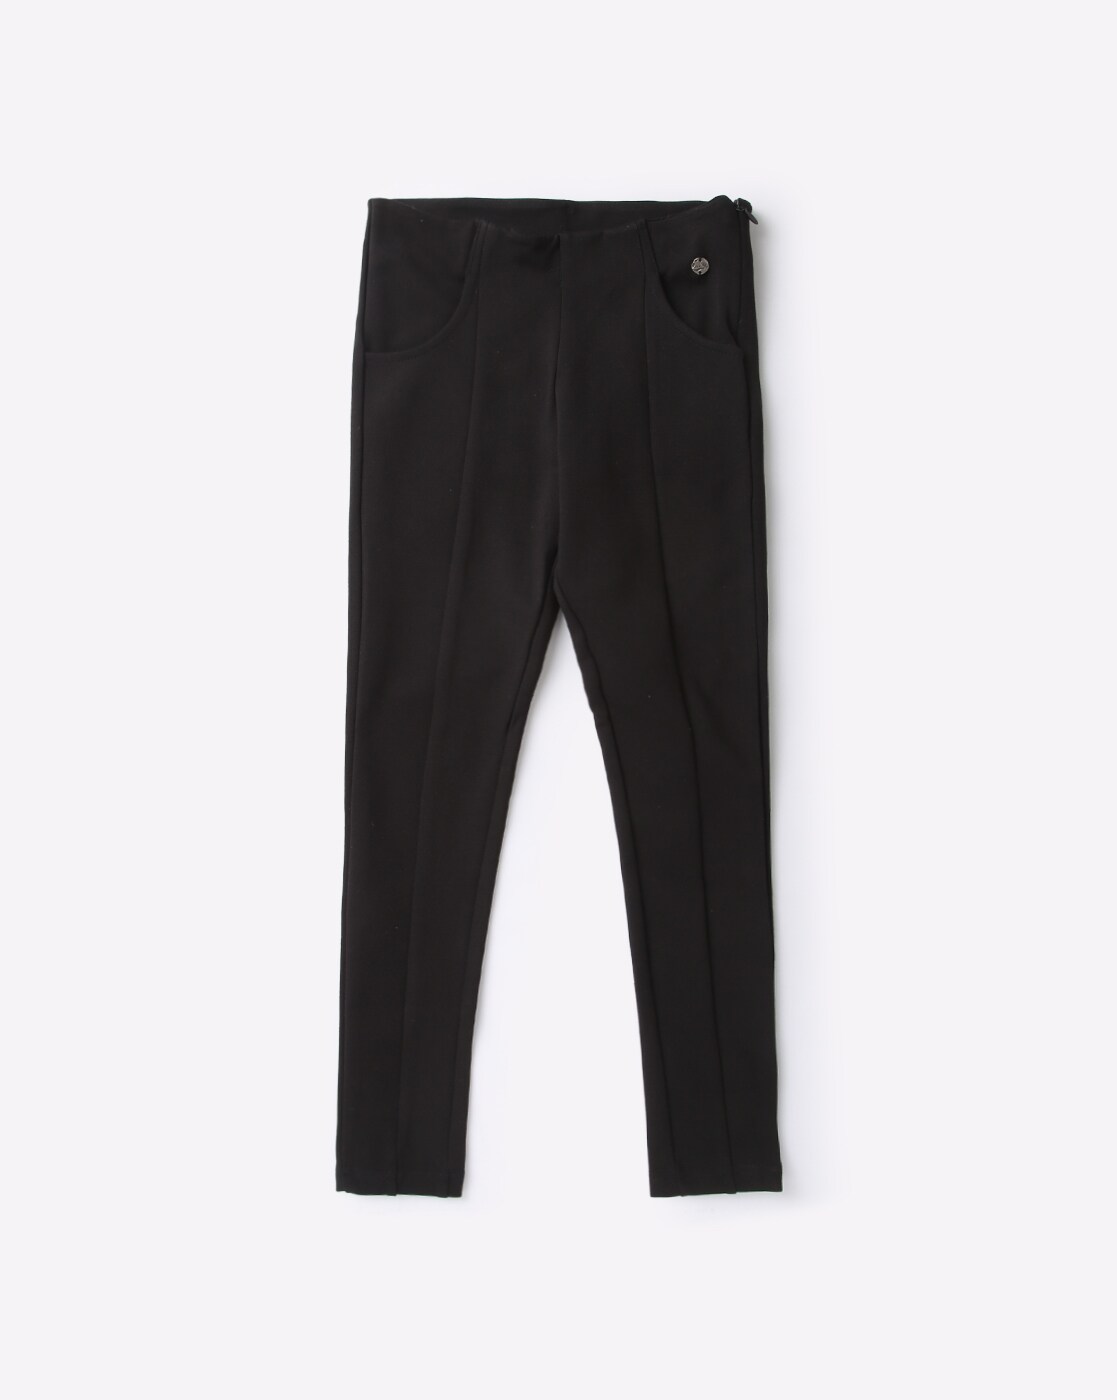 Buy AND GIRL Black Solid Rayon Regular Fit Girls Trousers | Shoppers Stop